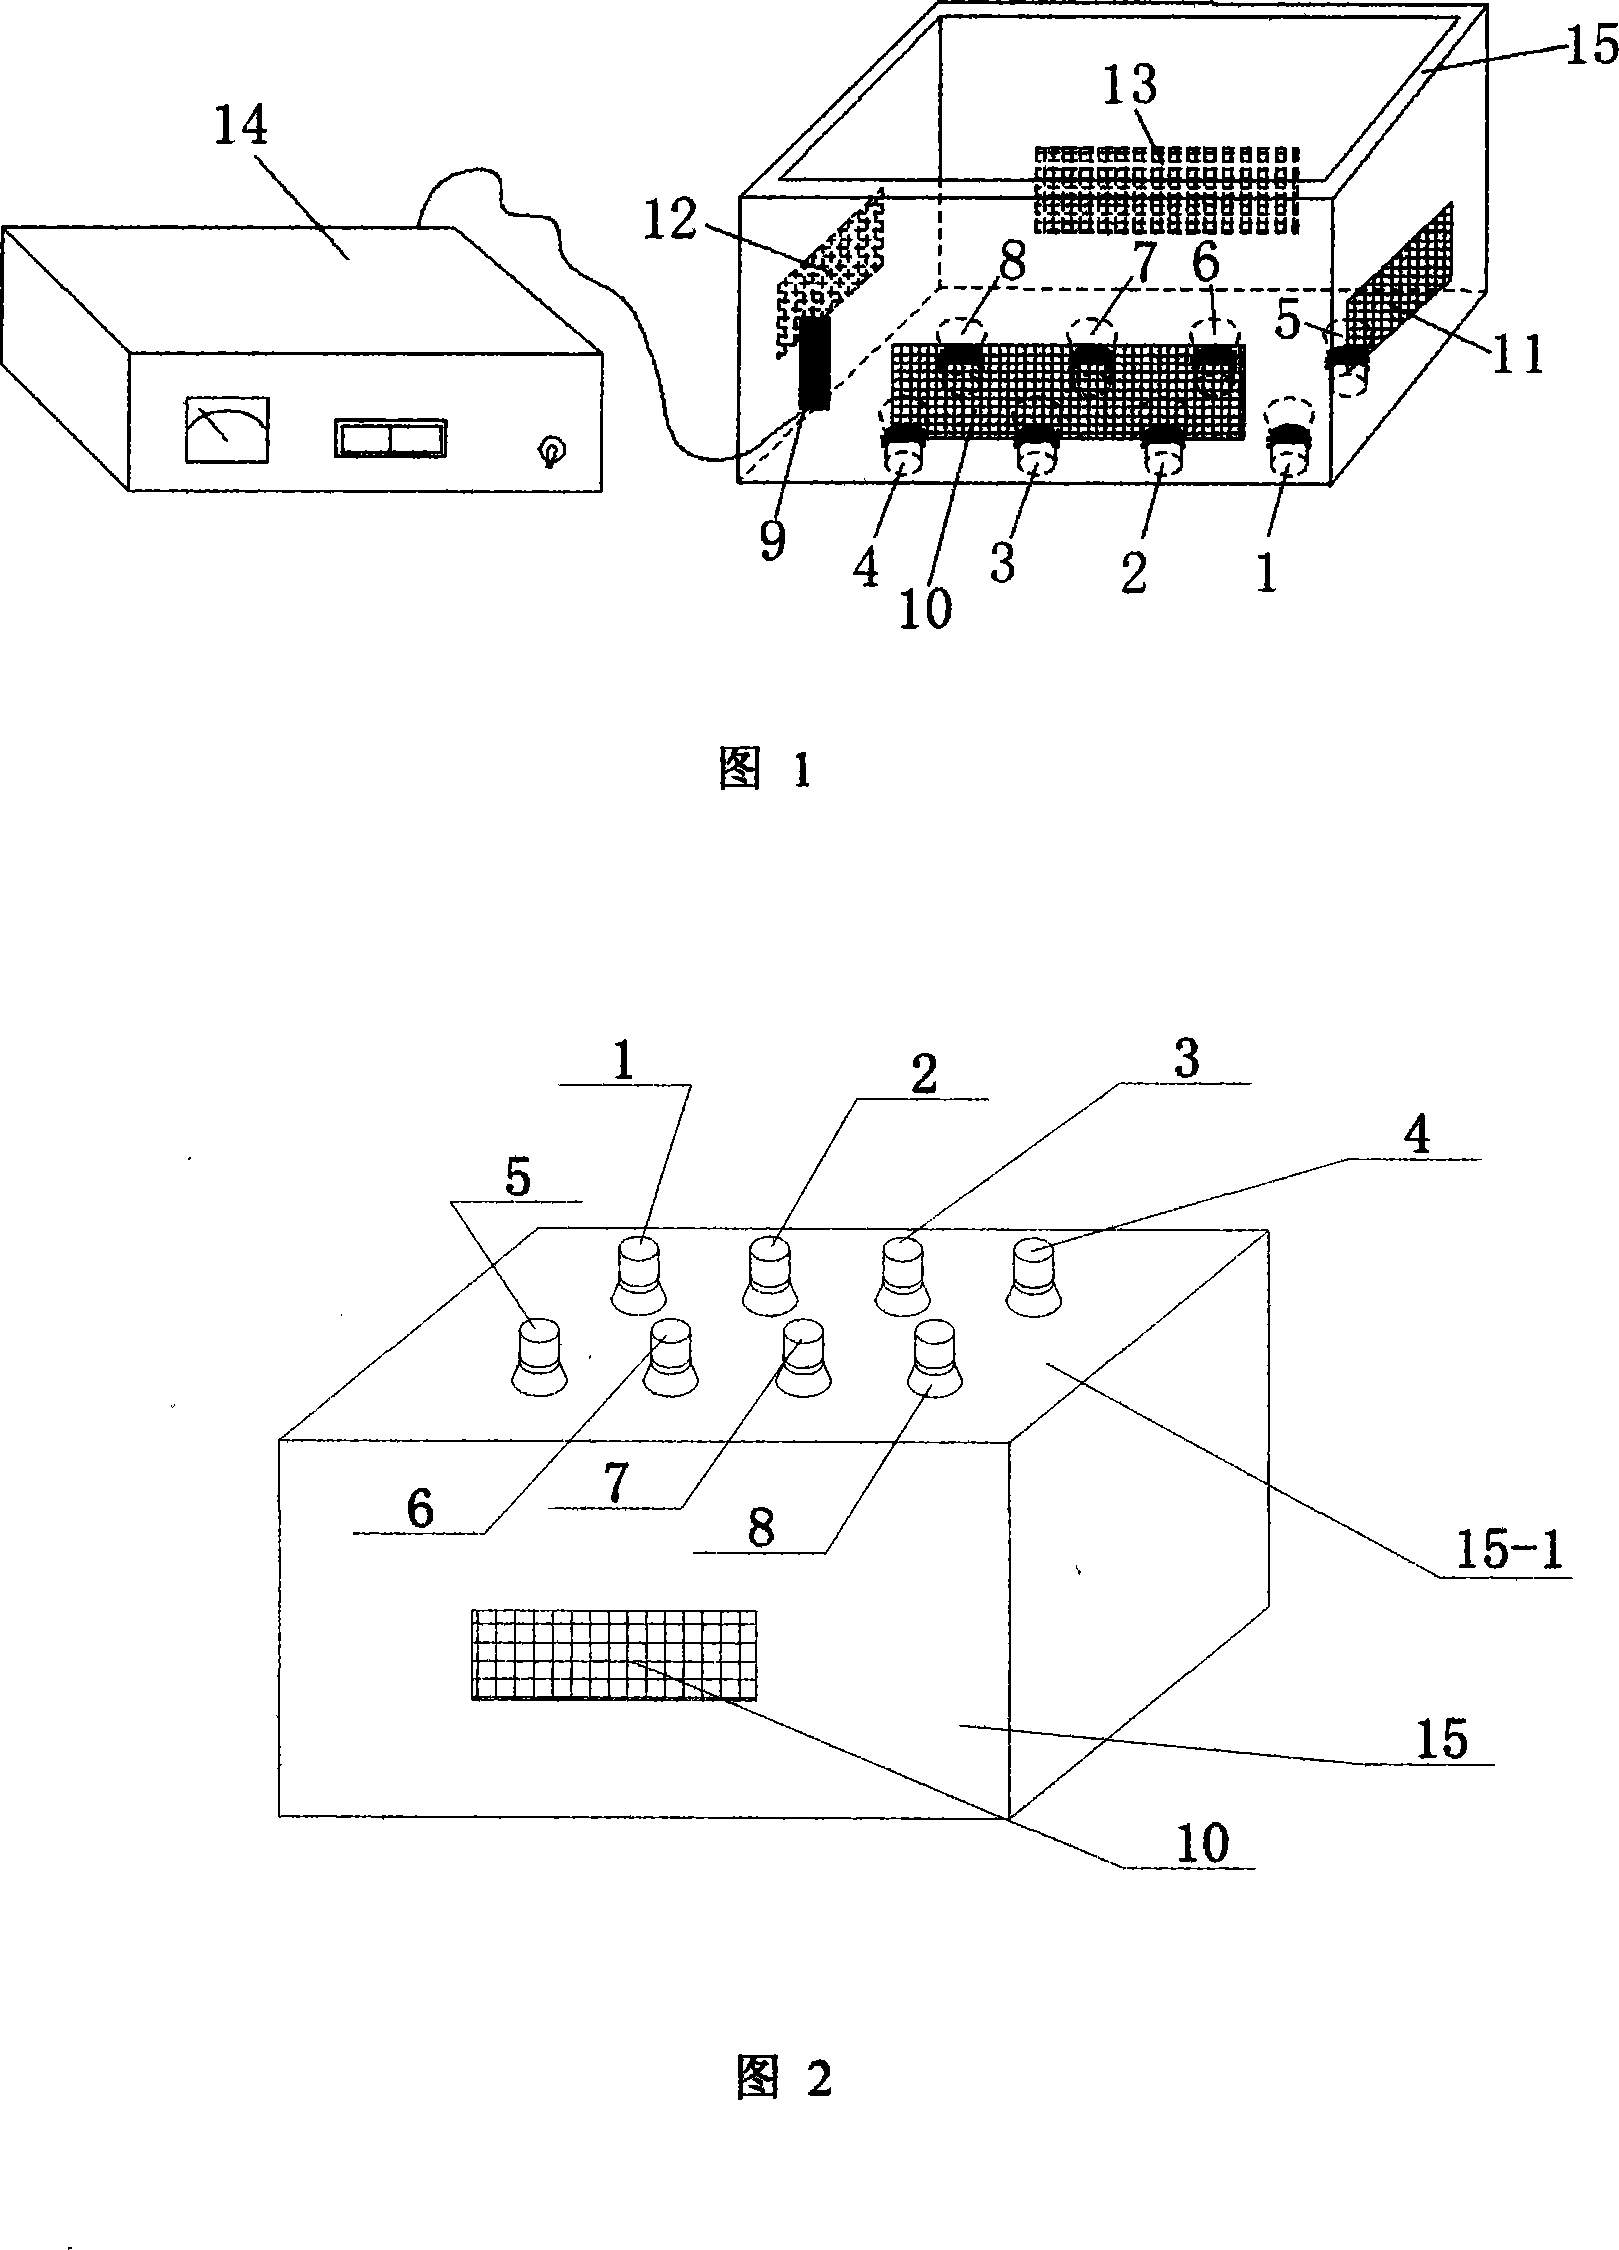 Eight-frequency ultrasonic wave apocynum degumming device